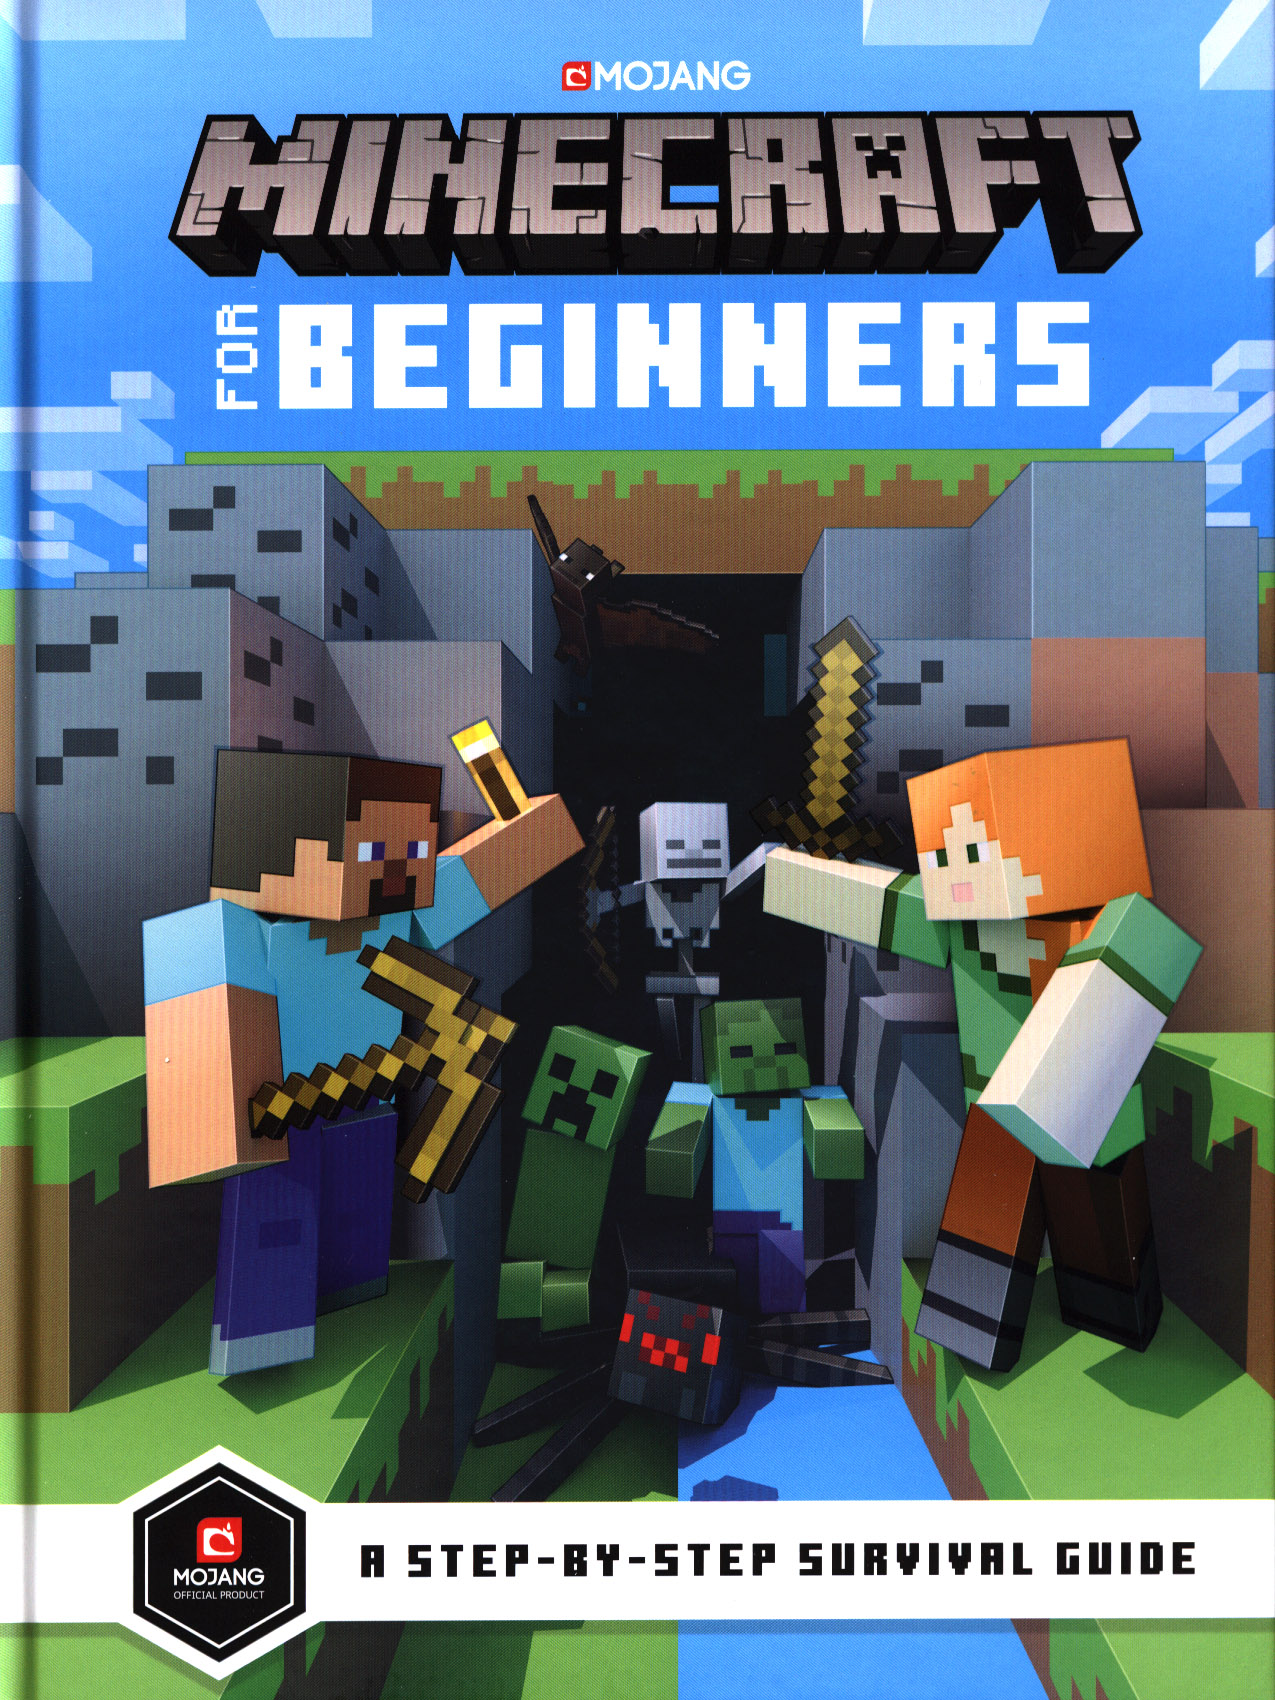 Parents Quick Guide To Video Games Minecraft English Edition Pdf Reddit